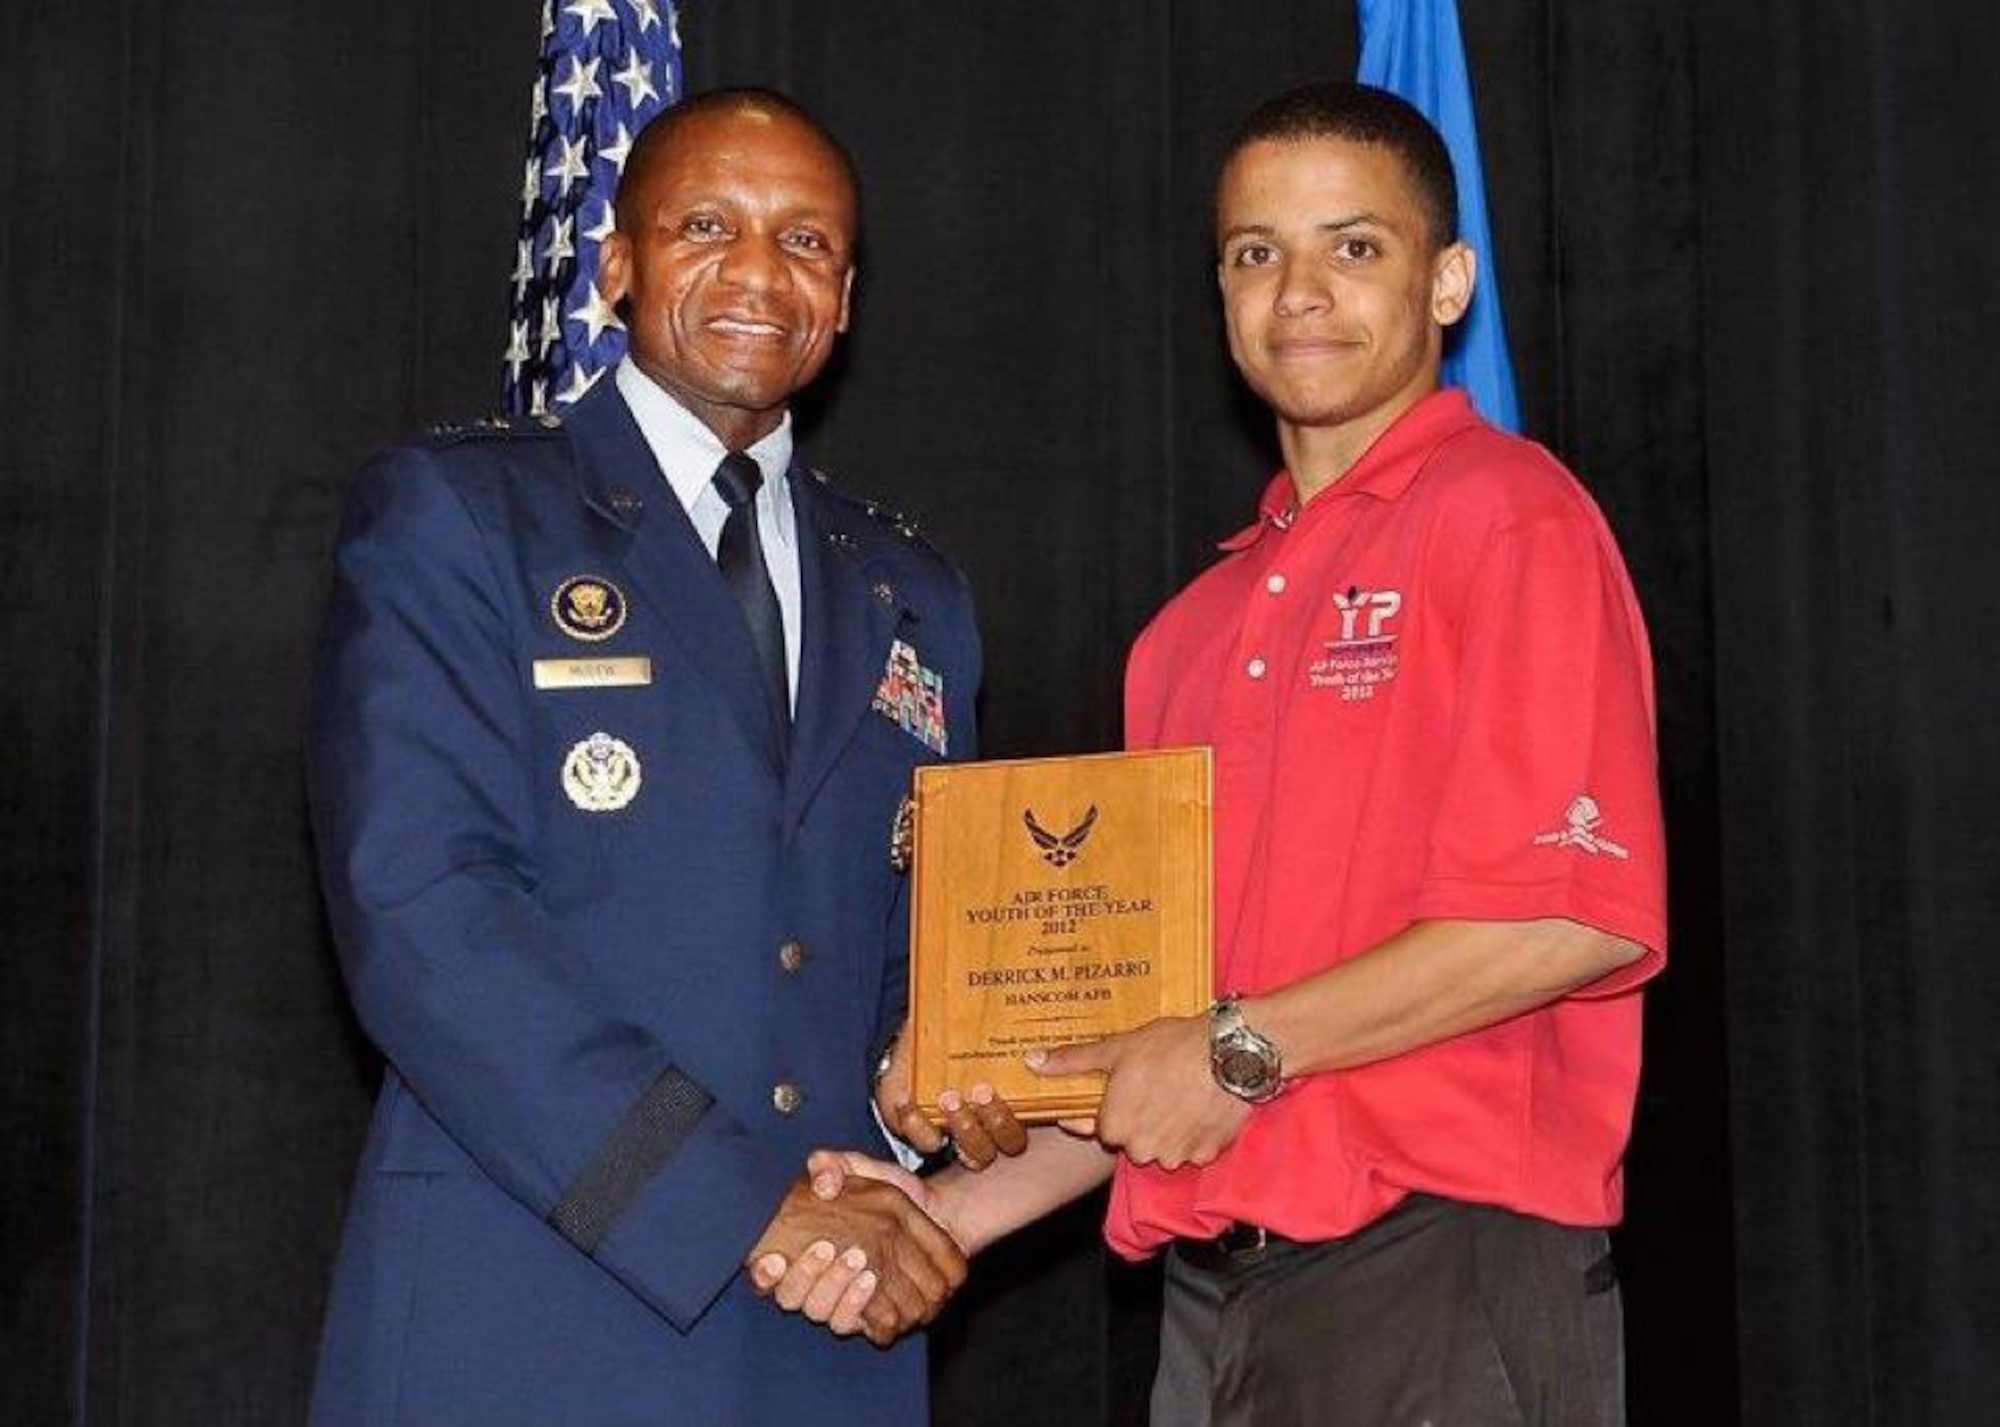 Derrick Pizarro, Hanscom Youth of the Year, receives a plaque from Maj. Gen. Darren McDew, Air Force District of Washington commander, during the Air Force Youth of the Year awards ceremony in June at the Pentagon. Being named Youth of the Year is the highest honor a Boys & Girls Club member can receive. (Courtesy photo)